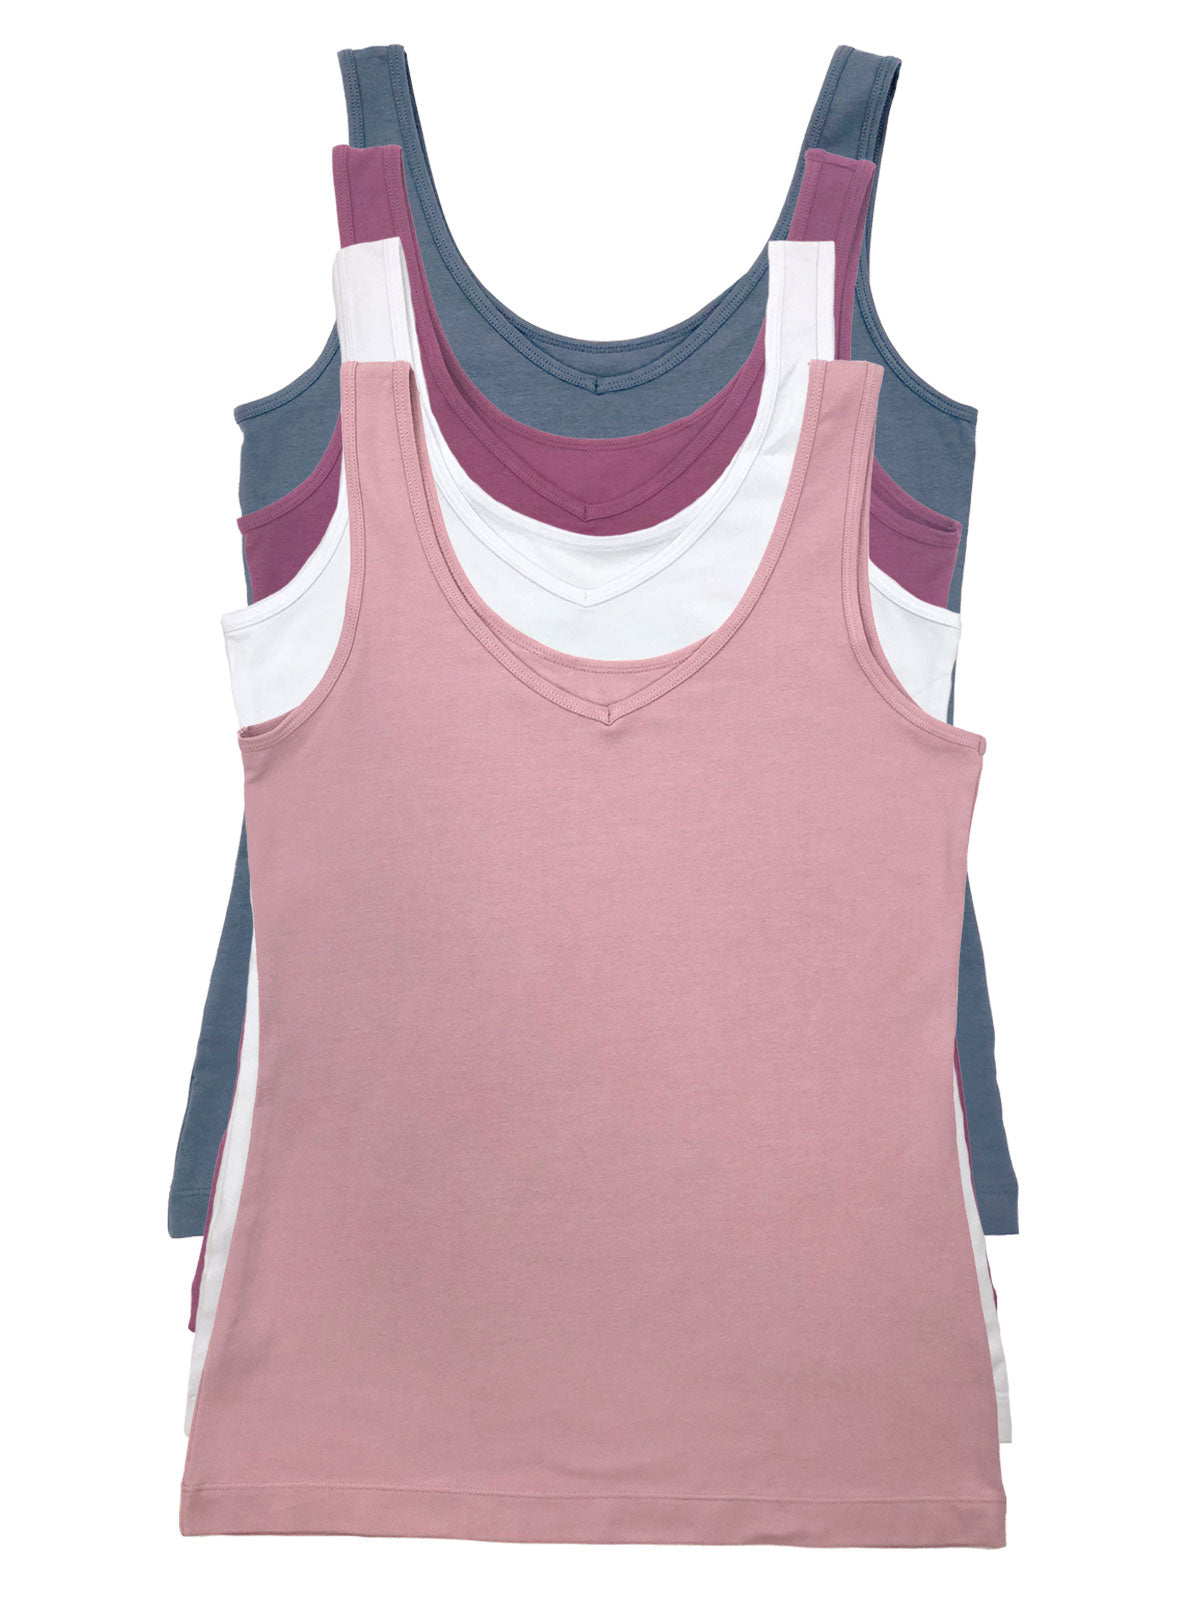 Image of Cotton Modal Reversible Tank Top 4-Pack